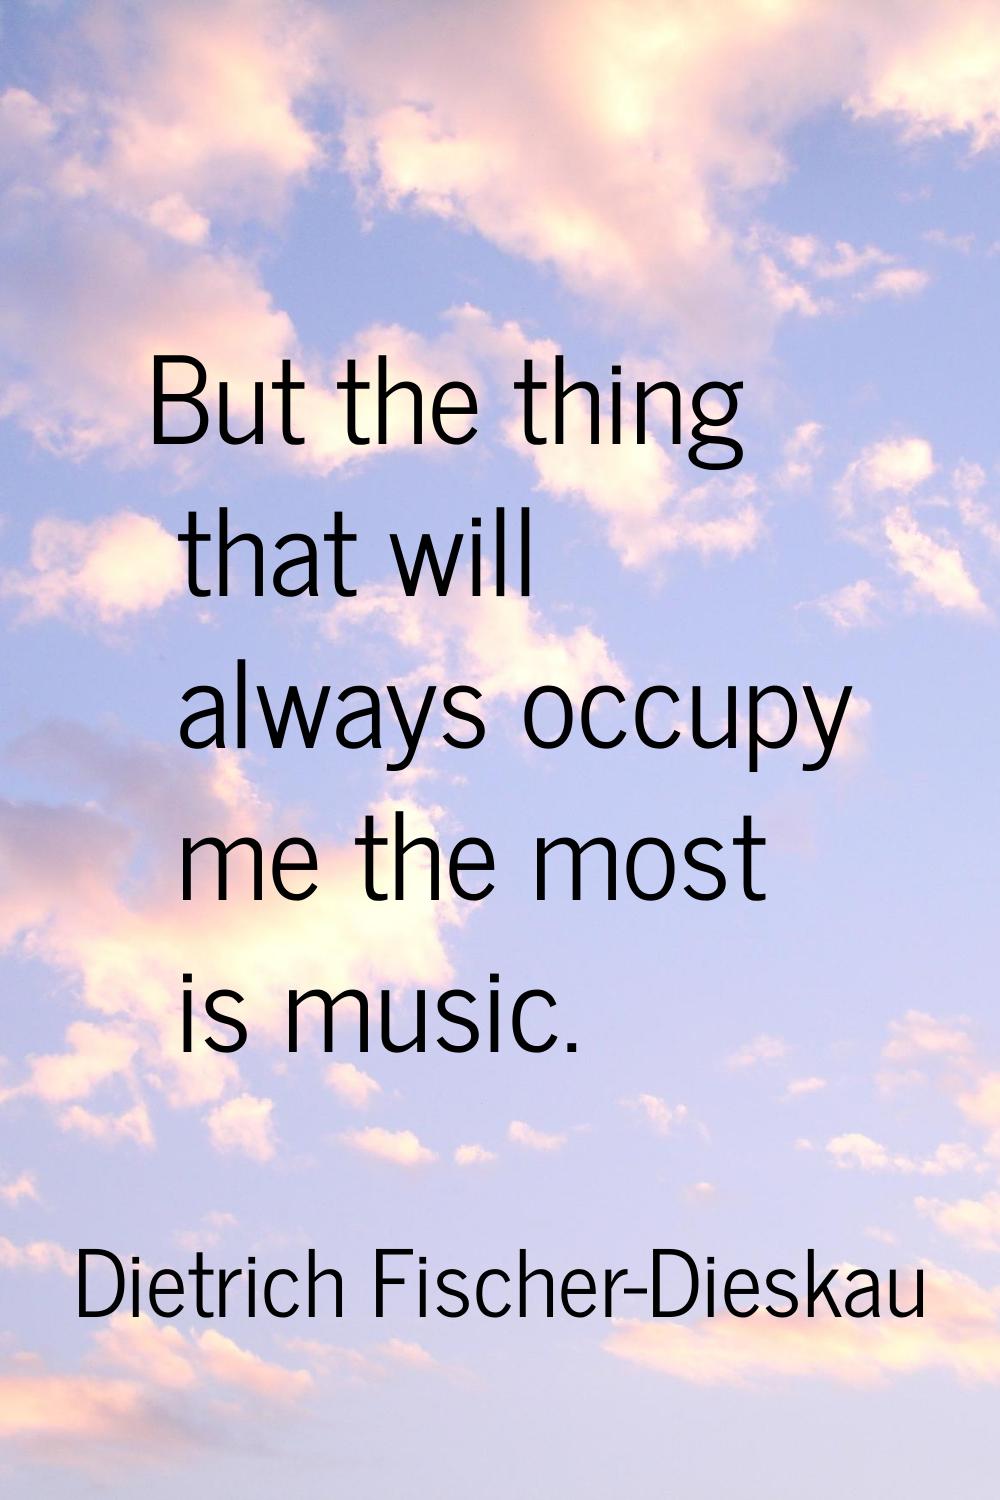 But the thing that will always occupy me the most is music.